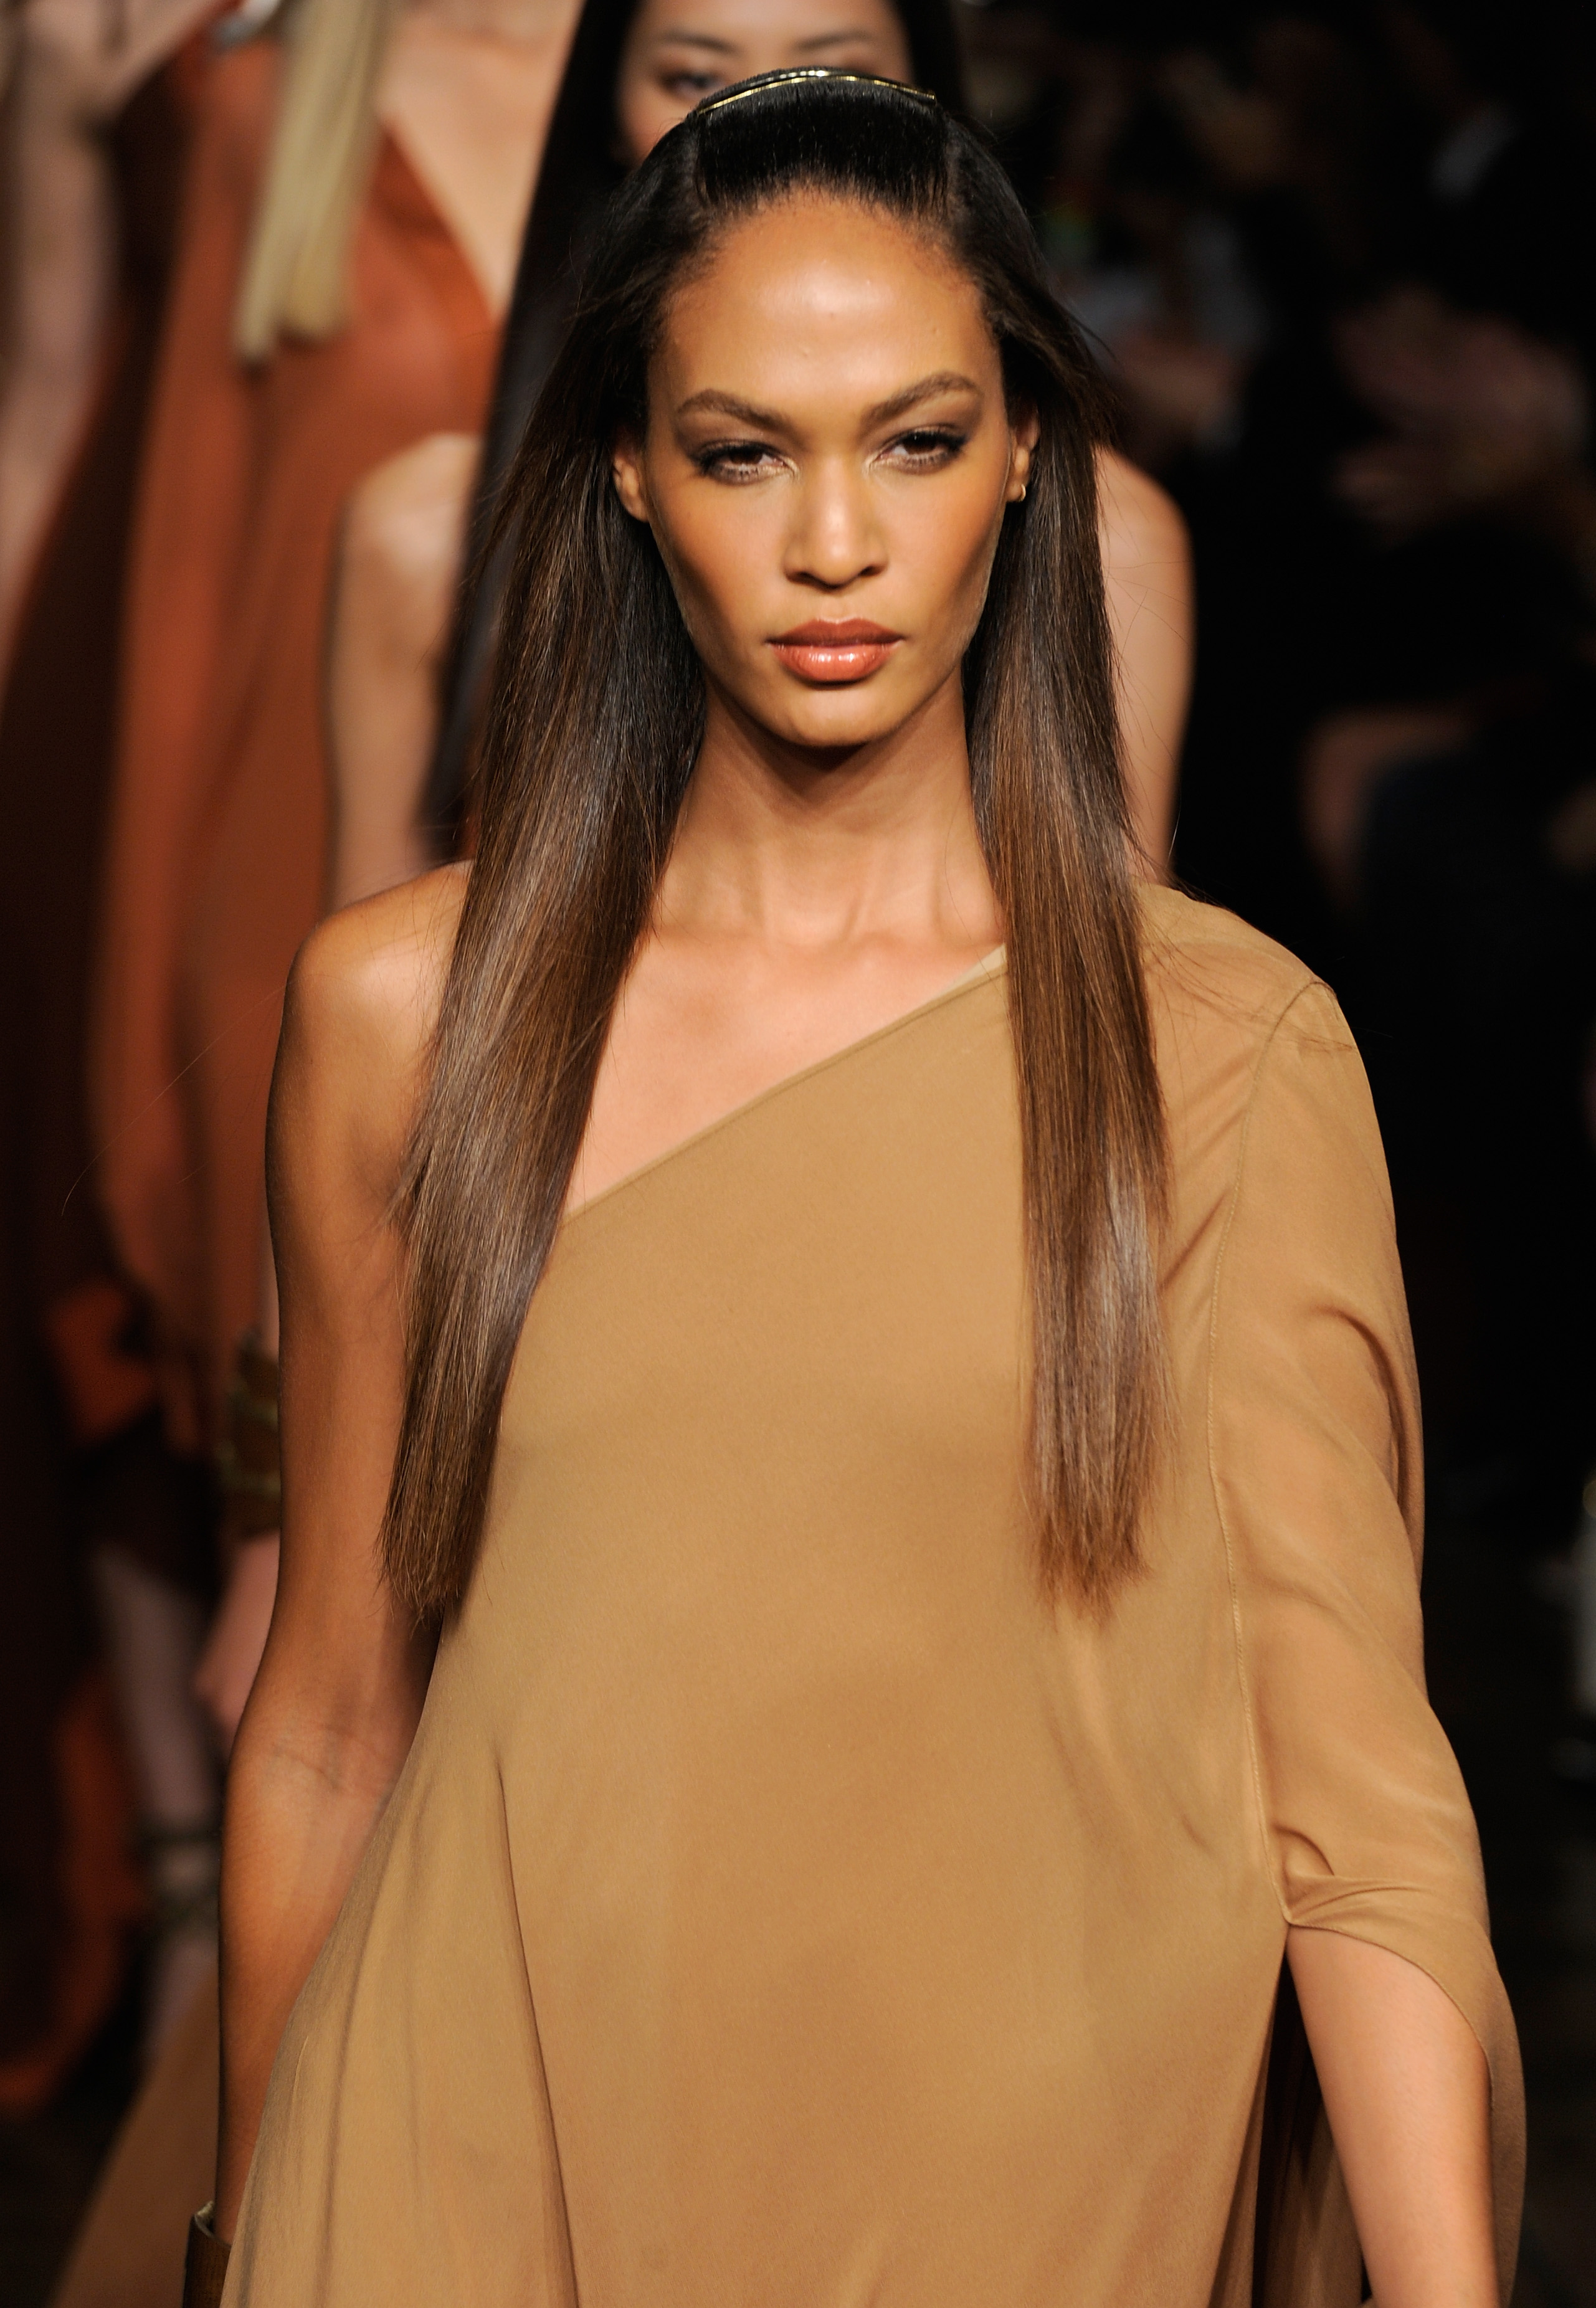 Awesome photos of famous Model  Joan  Smalls  BOOMSbeat